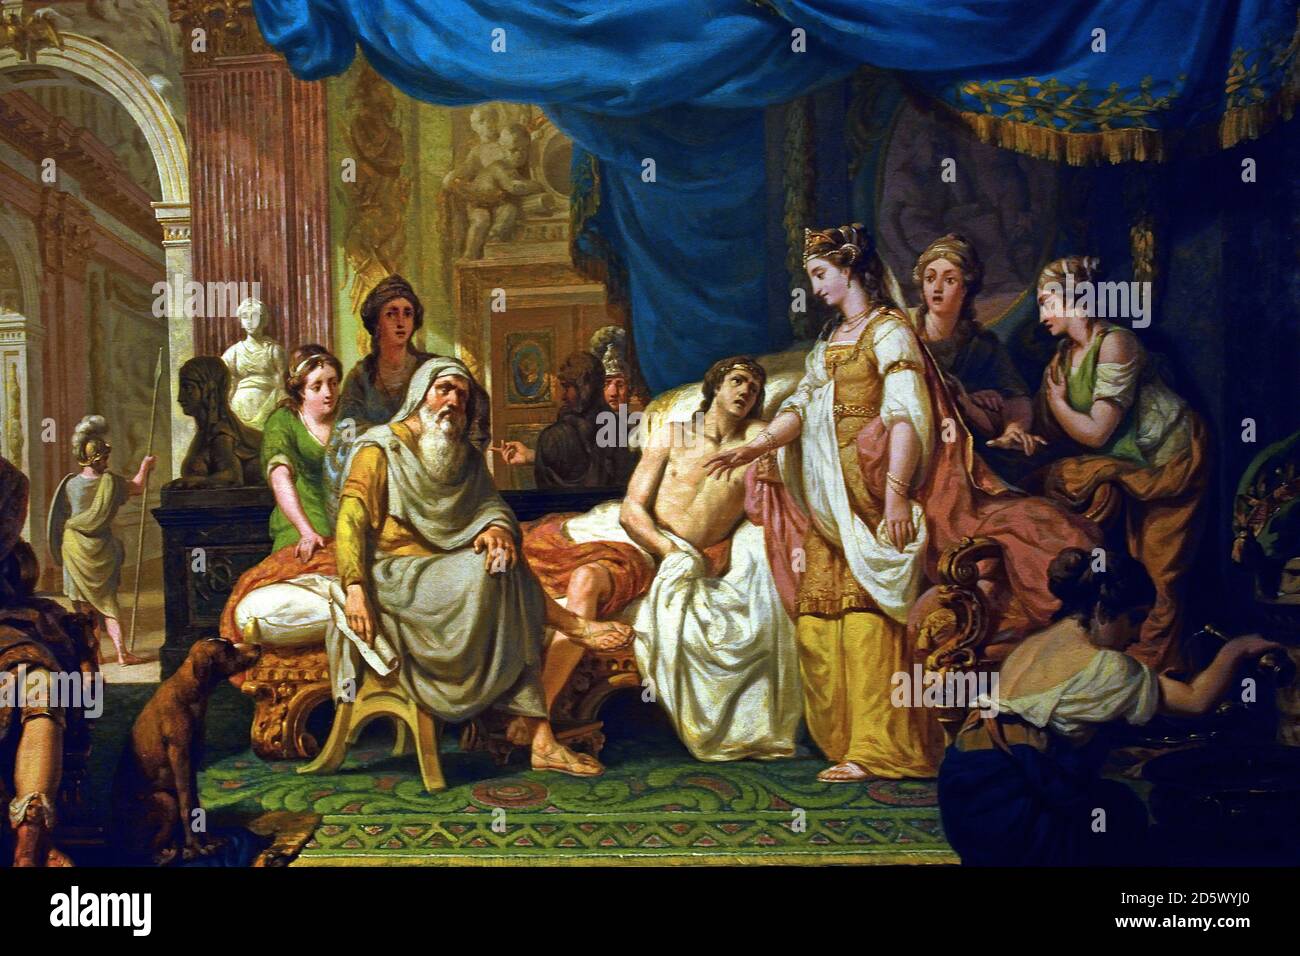 Seleucus waives Stratonice in favour of his Son Antiochus 1775 by Jean Grandjean (Amsterdam, February 5, 1752 - Rome, November 12, 1781)  Dutch painter and draftsman. The, Netherlands, Stock Photo